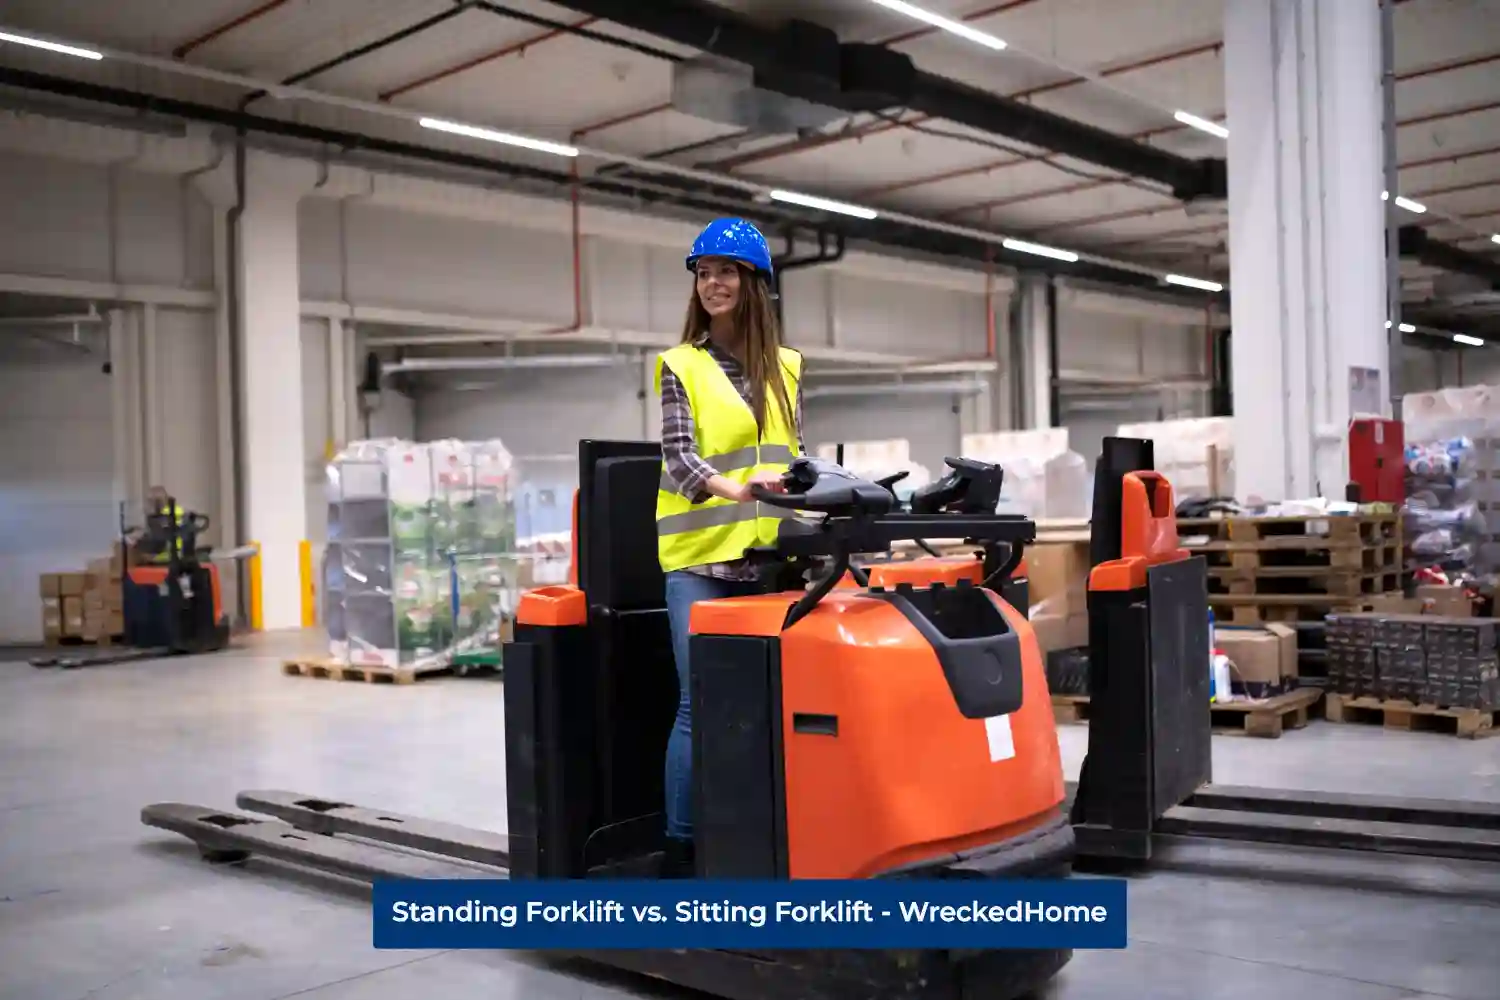 Woman driving Standing Forklift in a factory.